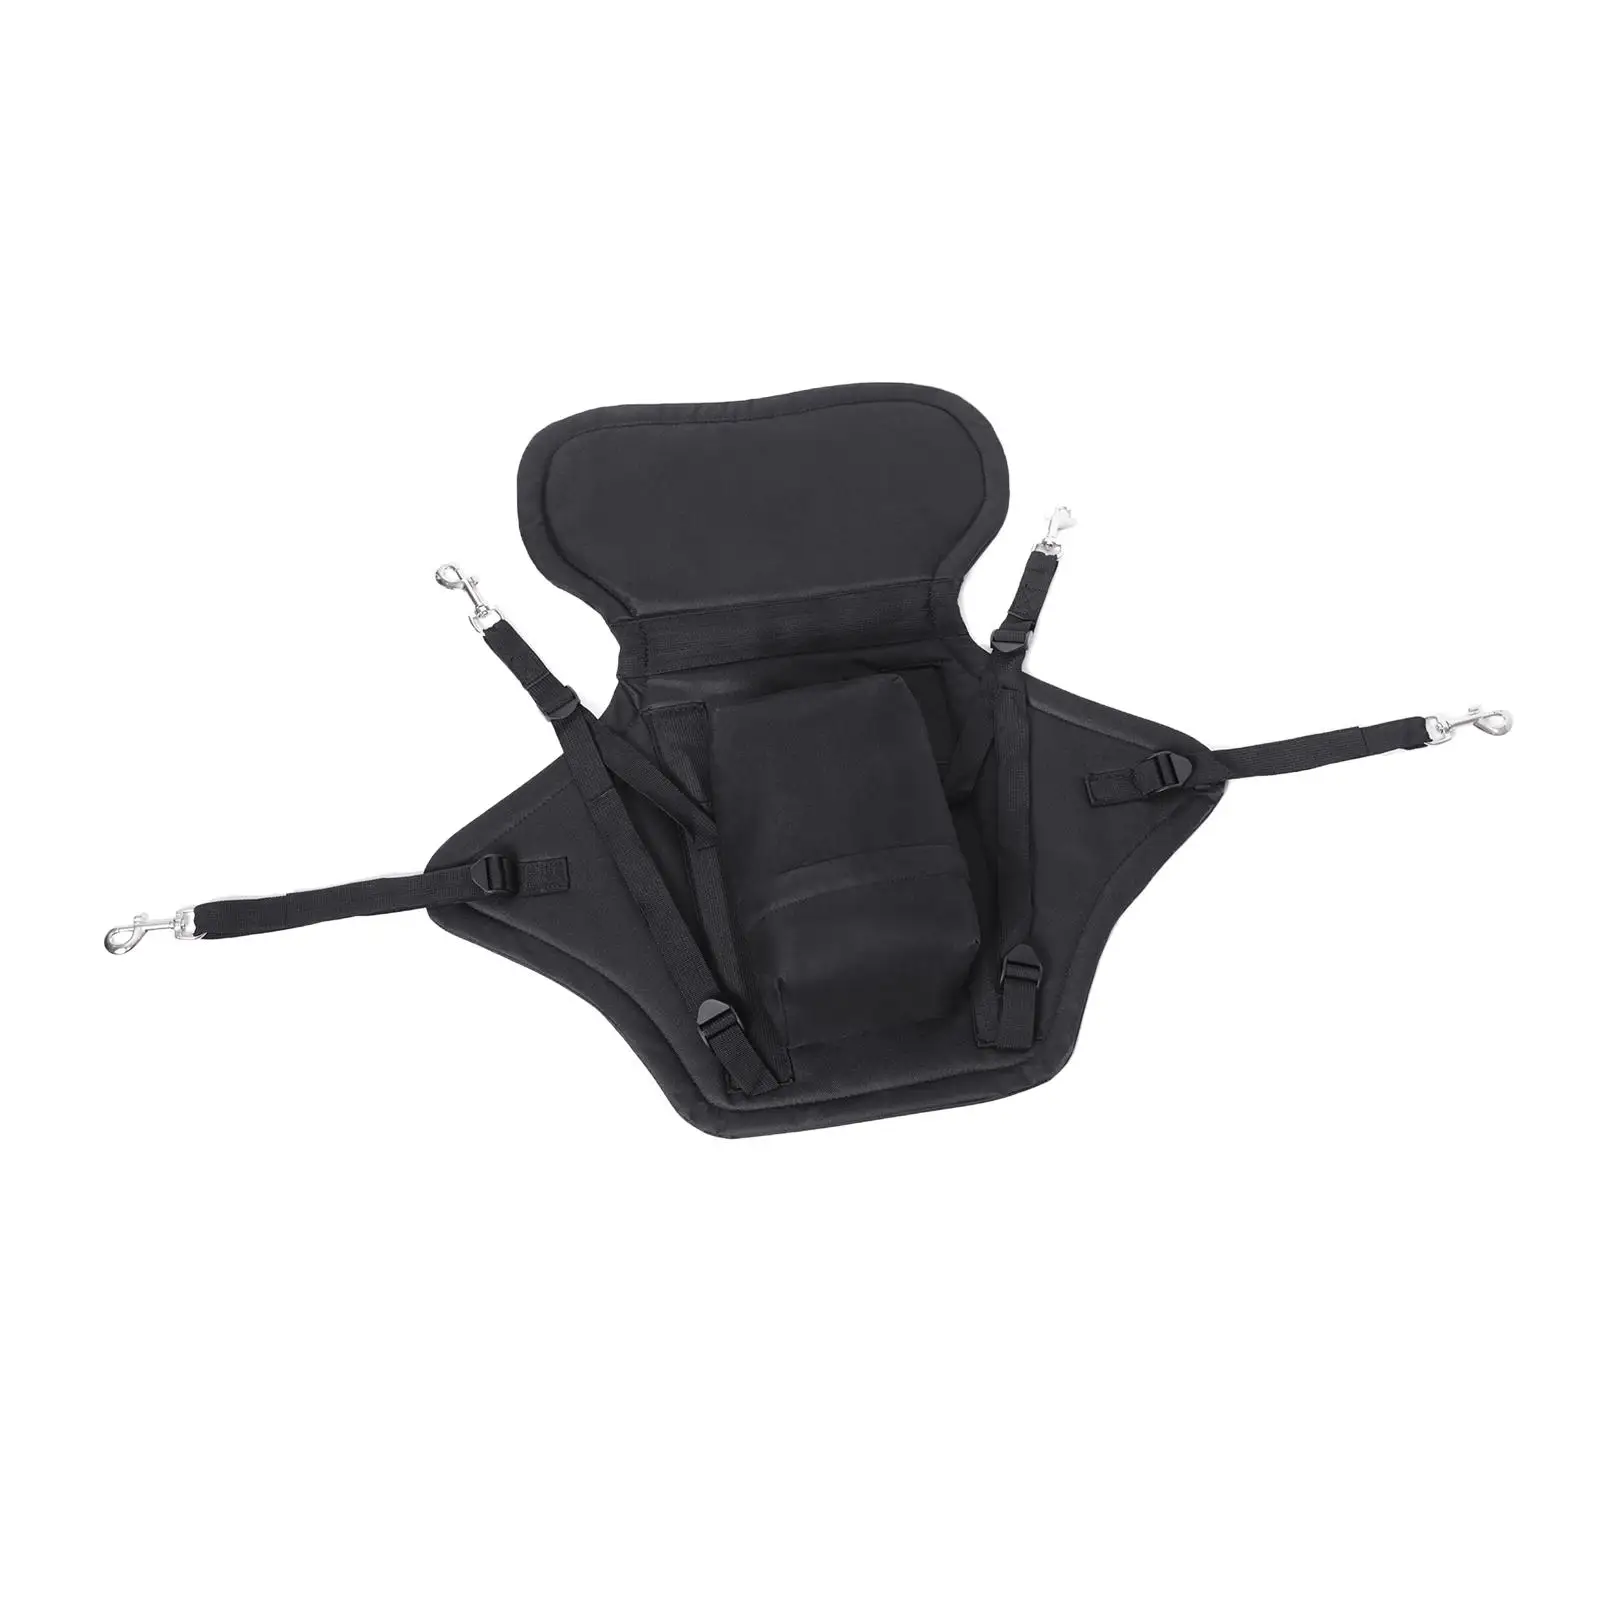 Detachable Kayak Seat Cushion Support Back Bleacher Chairs Black for Universal Sit Kids Adults Fishing